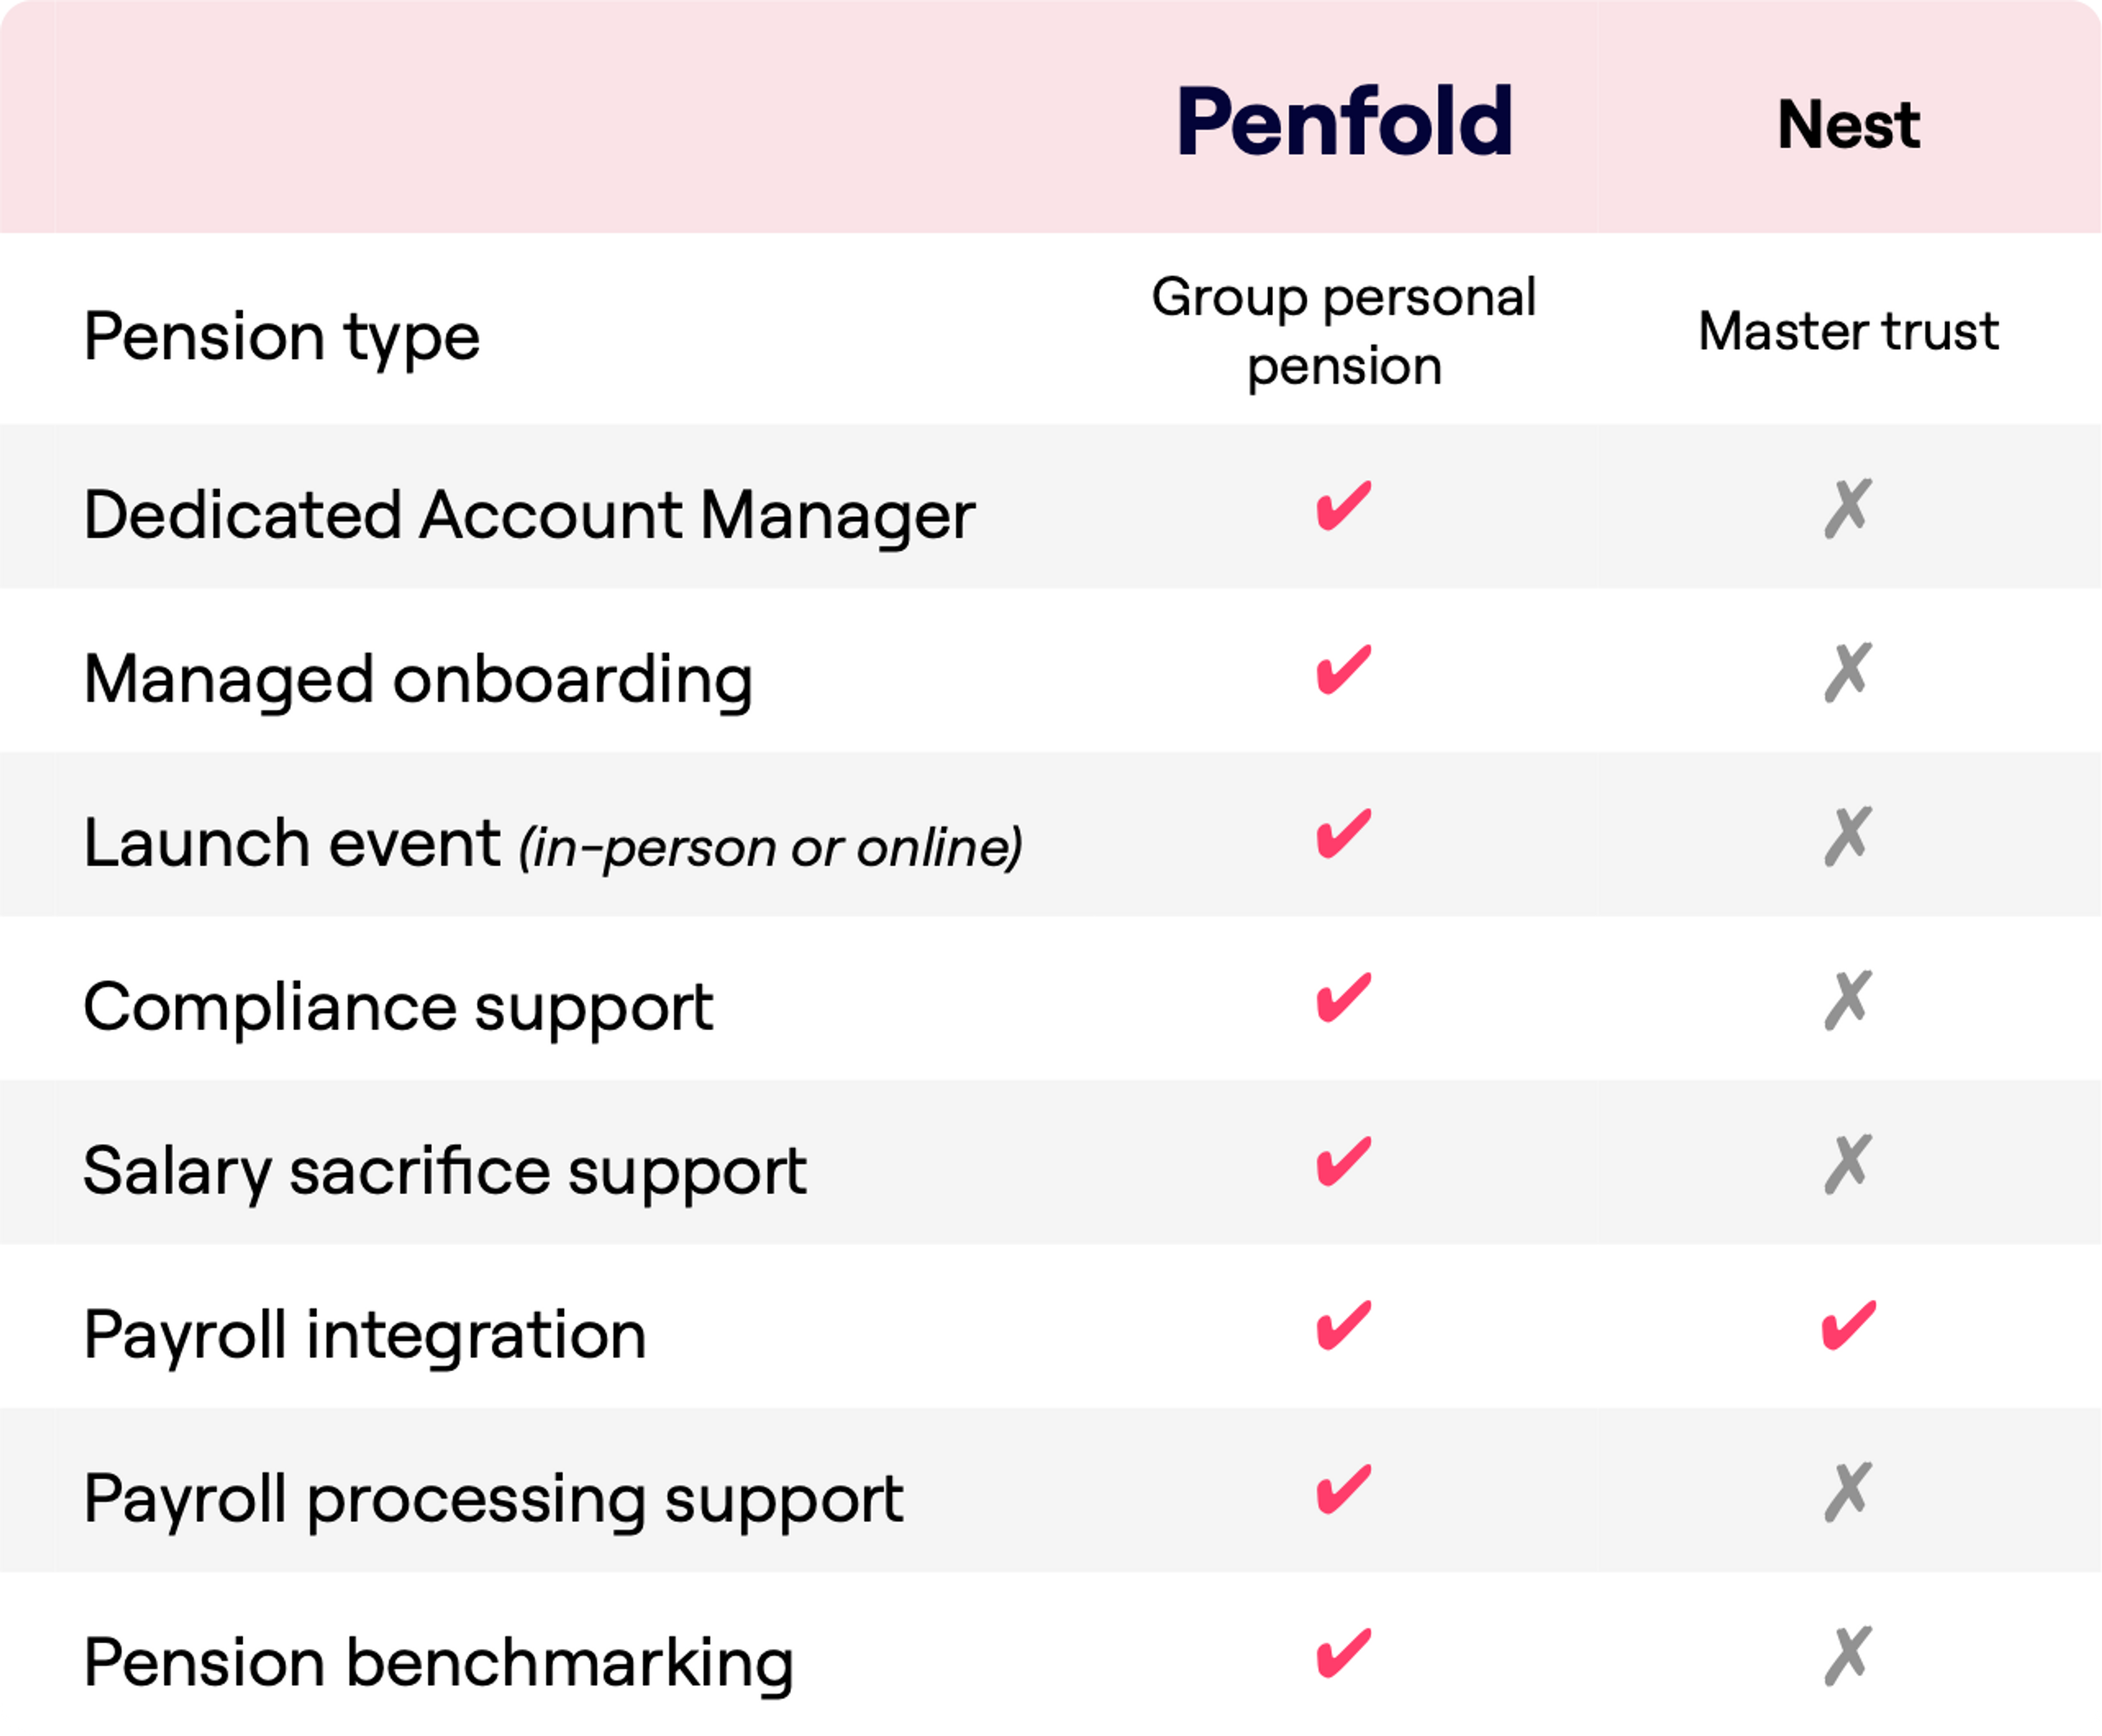 A comparison table between Penfold and Nest pension services. Penfold is labeled as offering a Group personal pension, while Nest is categorized as a Master trust. The table compares services like Dedicated Account Manager, Managed onboarding, Launch event, Compliance support, Salary sacrifice support, Payroll integration, Payroll processing support, and Pension benchmarking. Penfold offers all eight services listed, whereas Nest only offers Payroll integration.